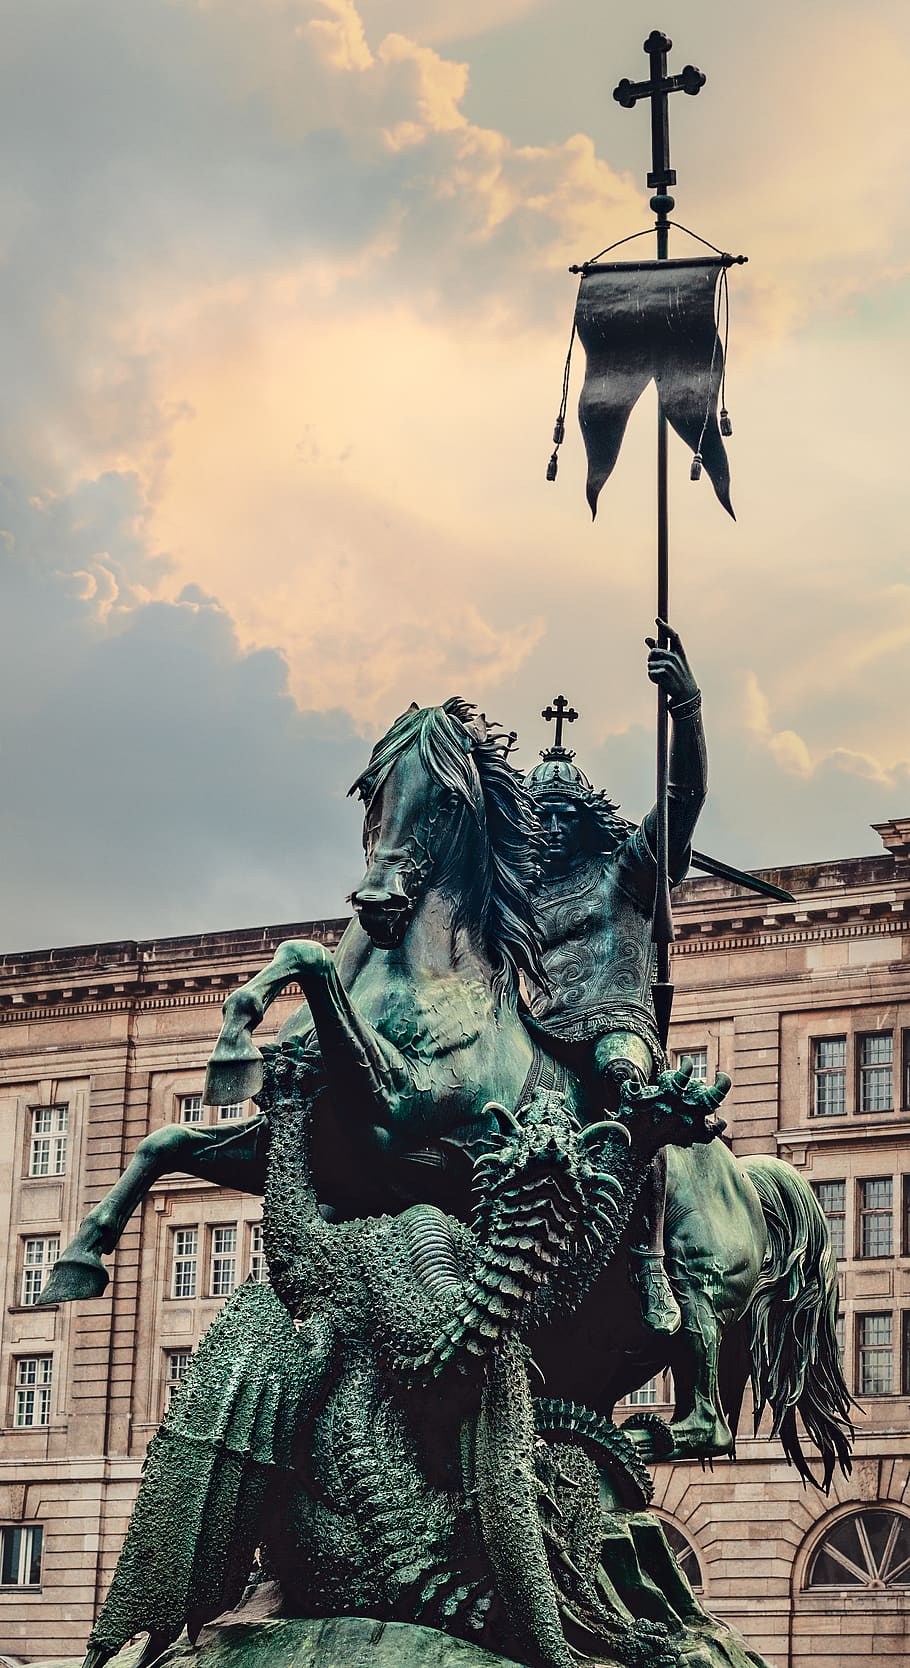 St George Dragons iPhone Wallpapers | iPhone X LOCK SCREEN /… | Flickr